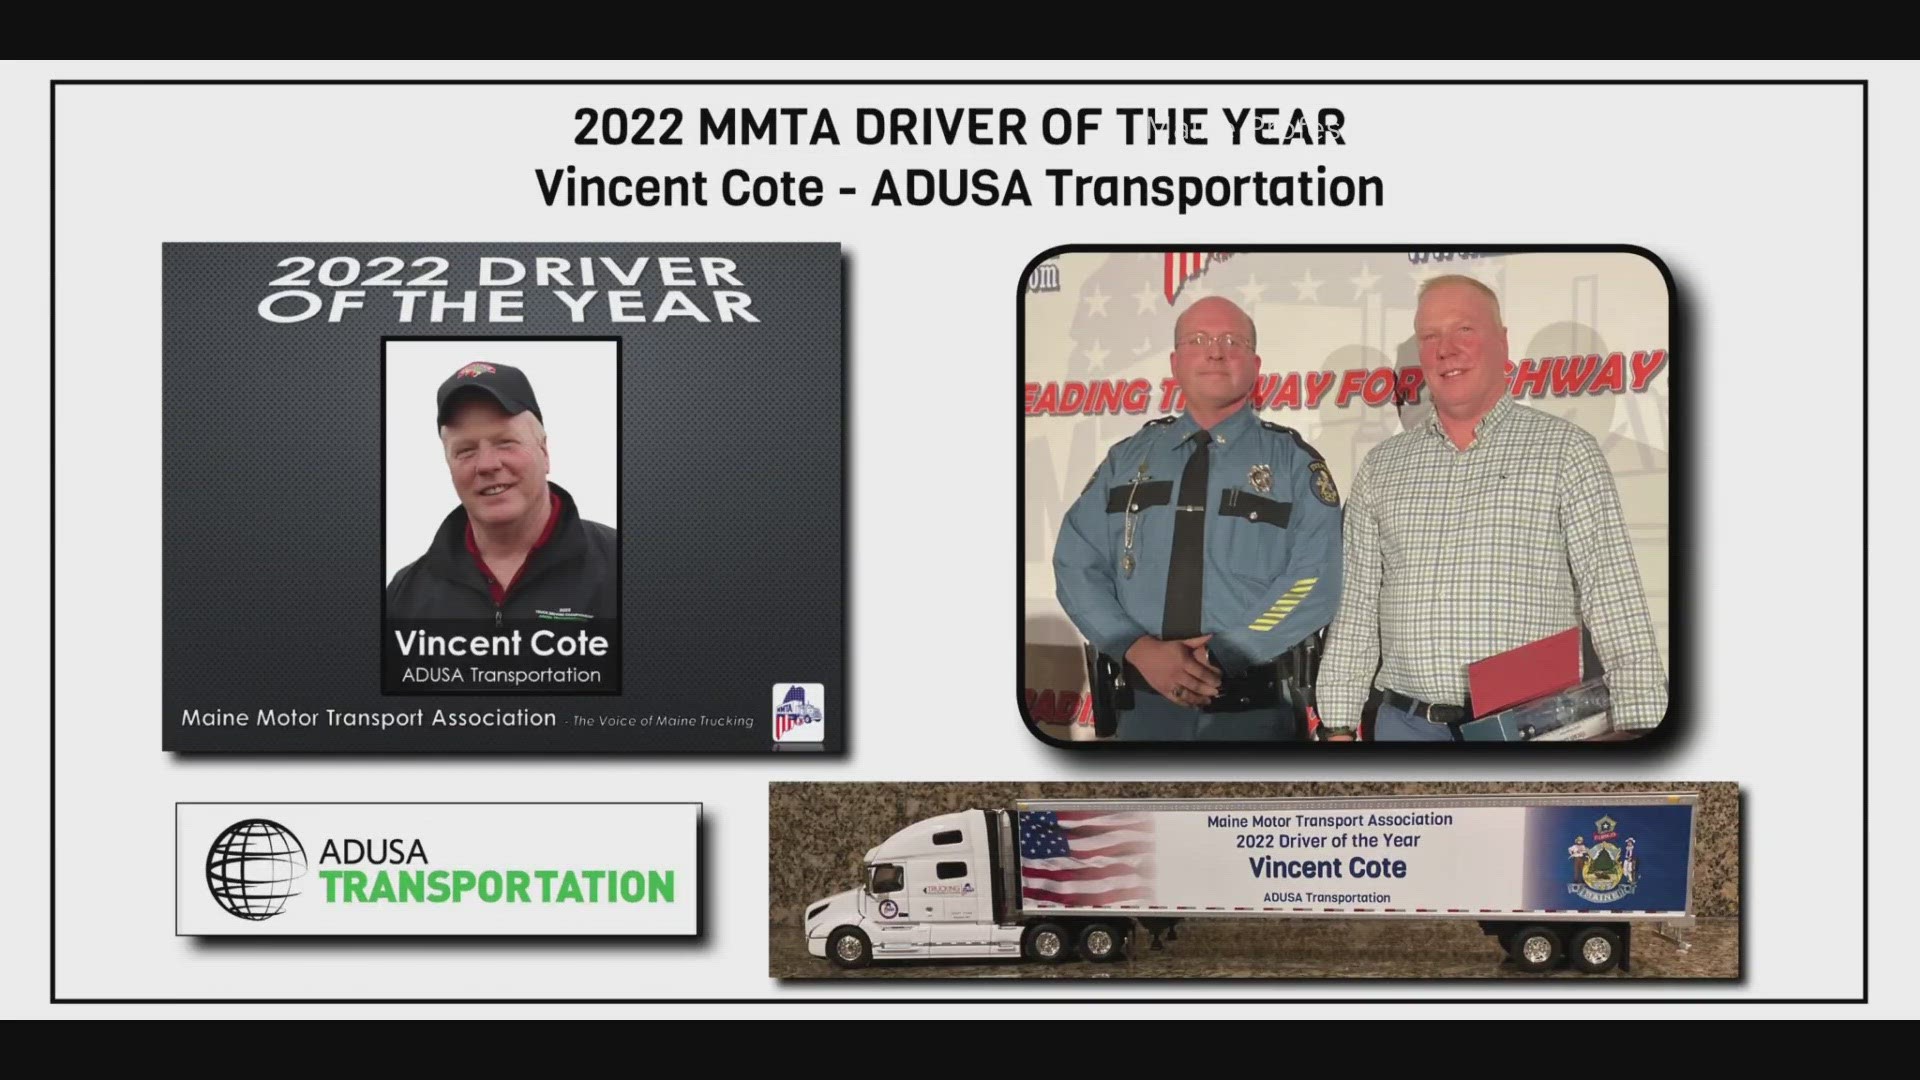 Vincent Cote has been driving professionally for 37 years. He received the 2022 Driver of the Year award from the Maine Motor Transport Association.